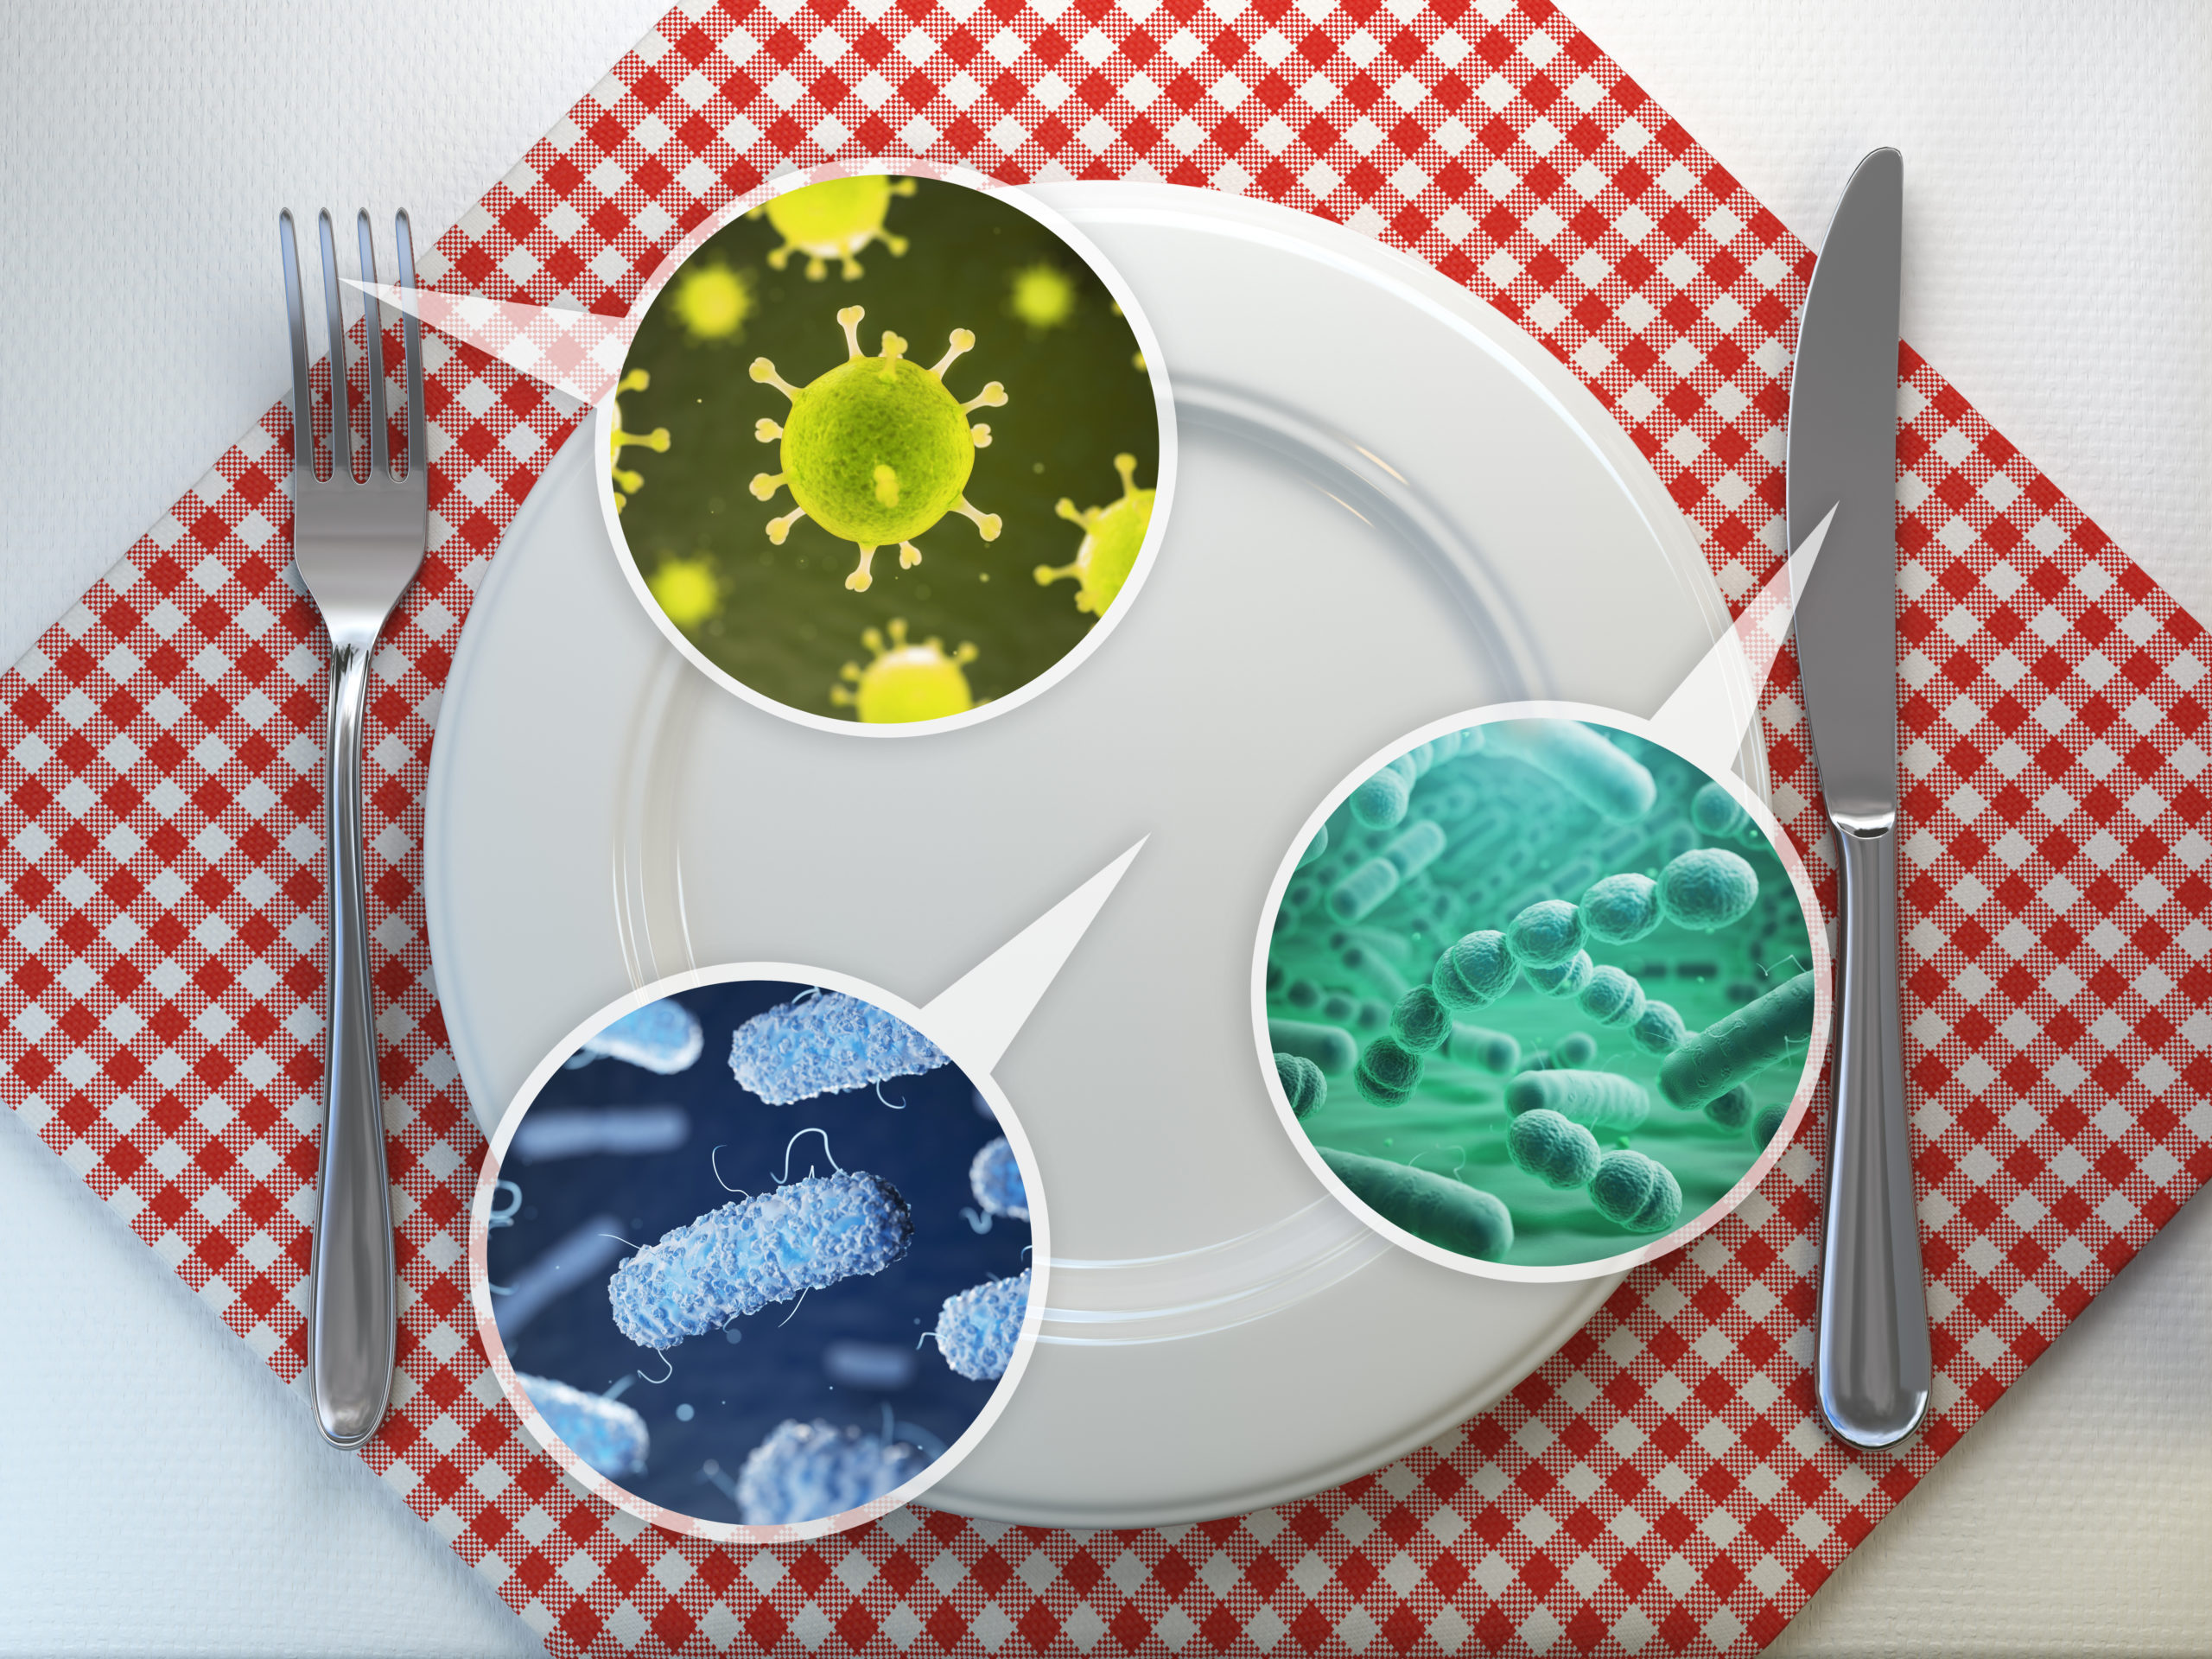 graphic of a plate showing germs on the plate, fork, and knife